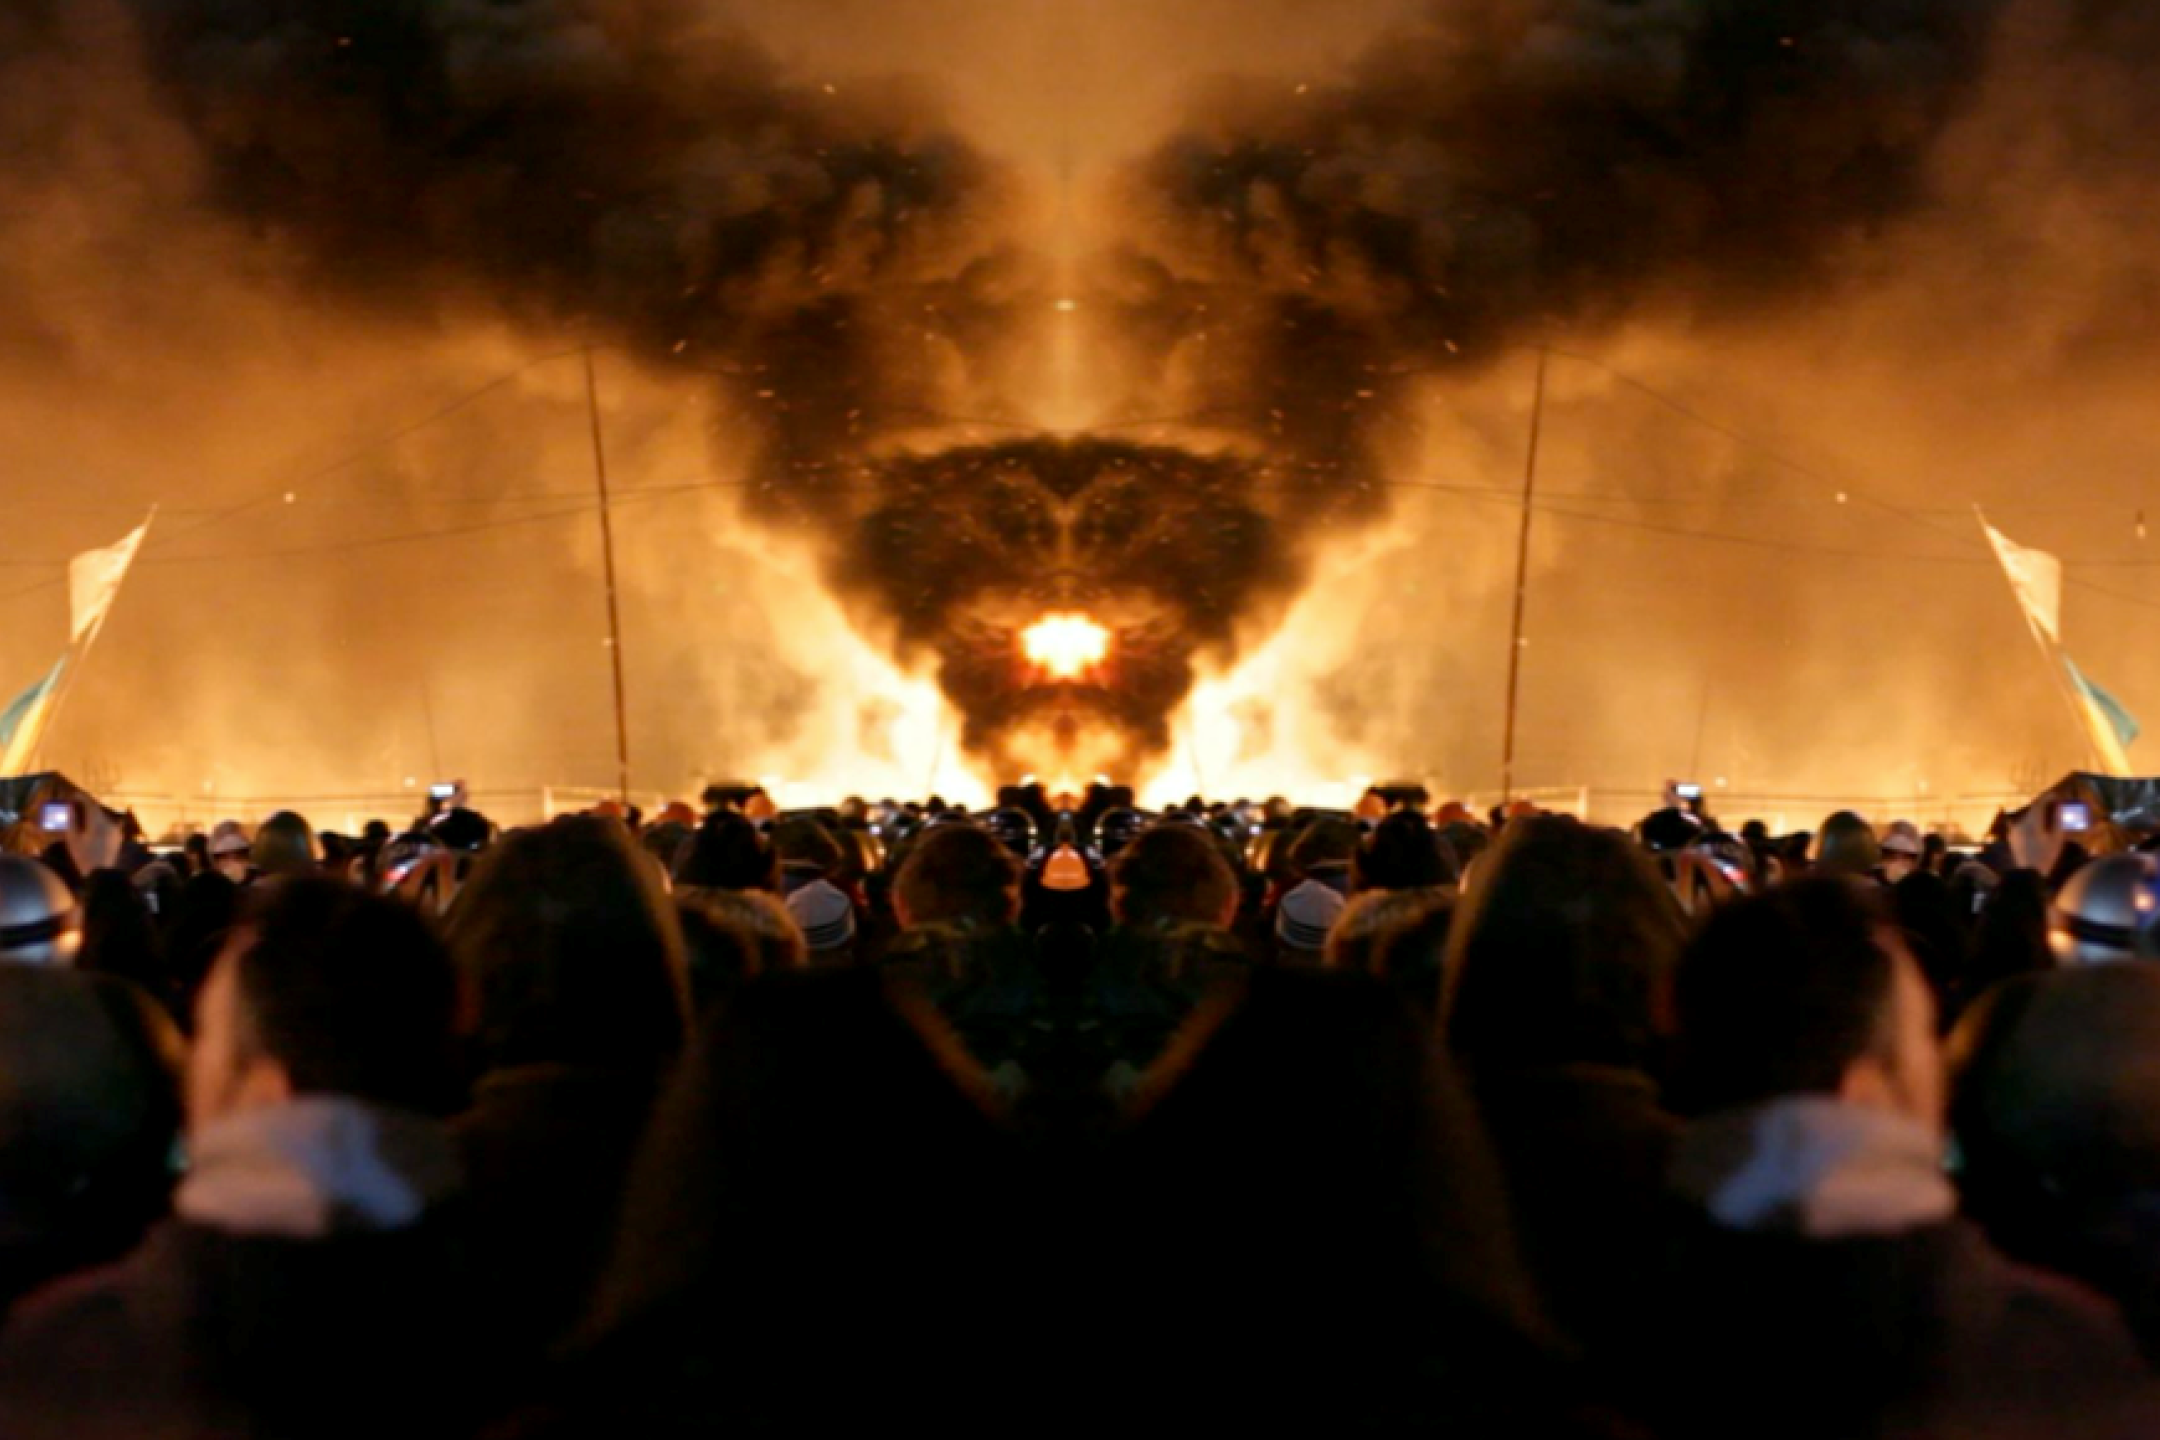 A large group of people stands close together and looks towards a column of smoke that rises in the sky.